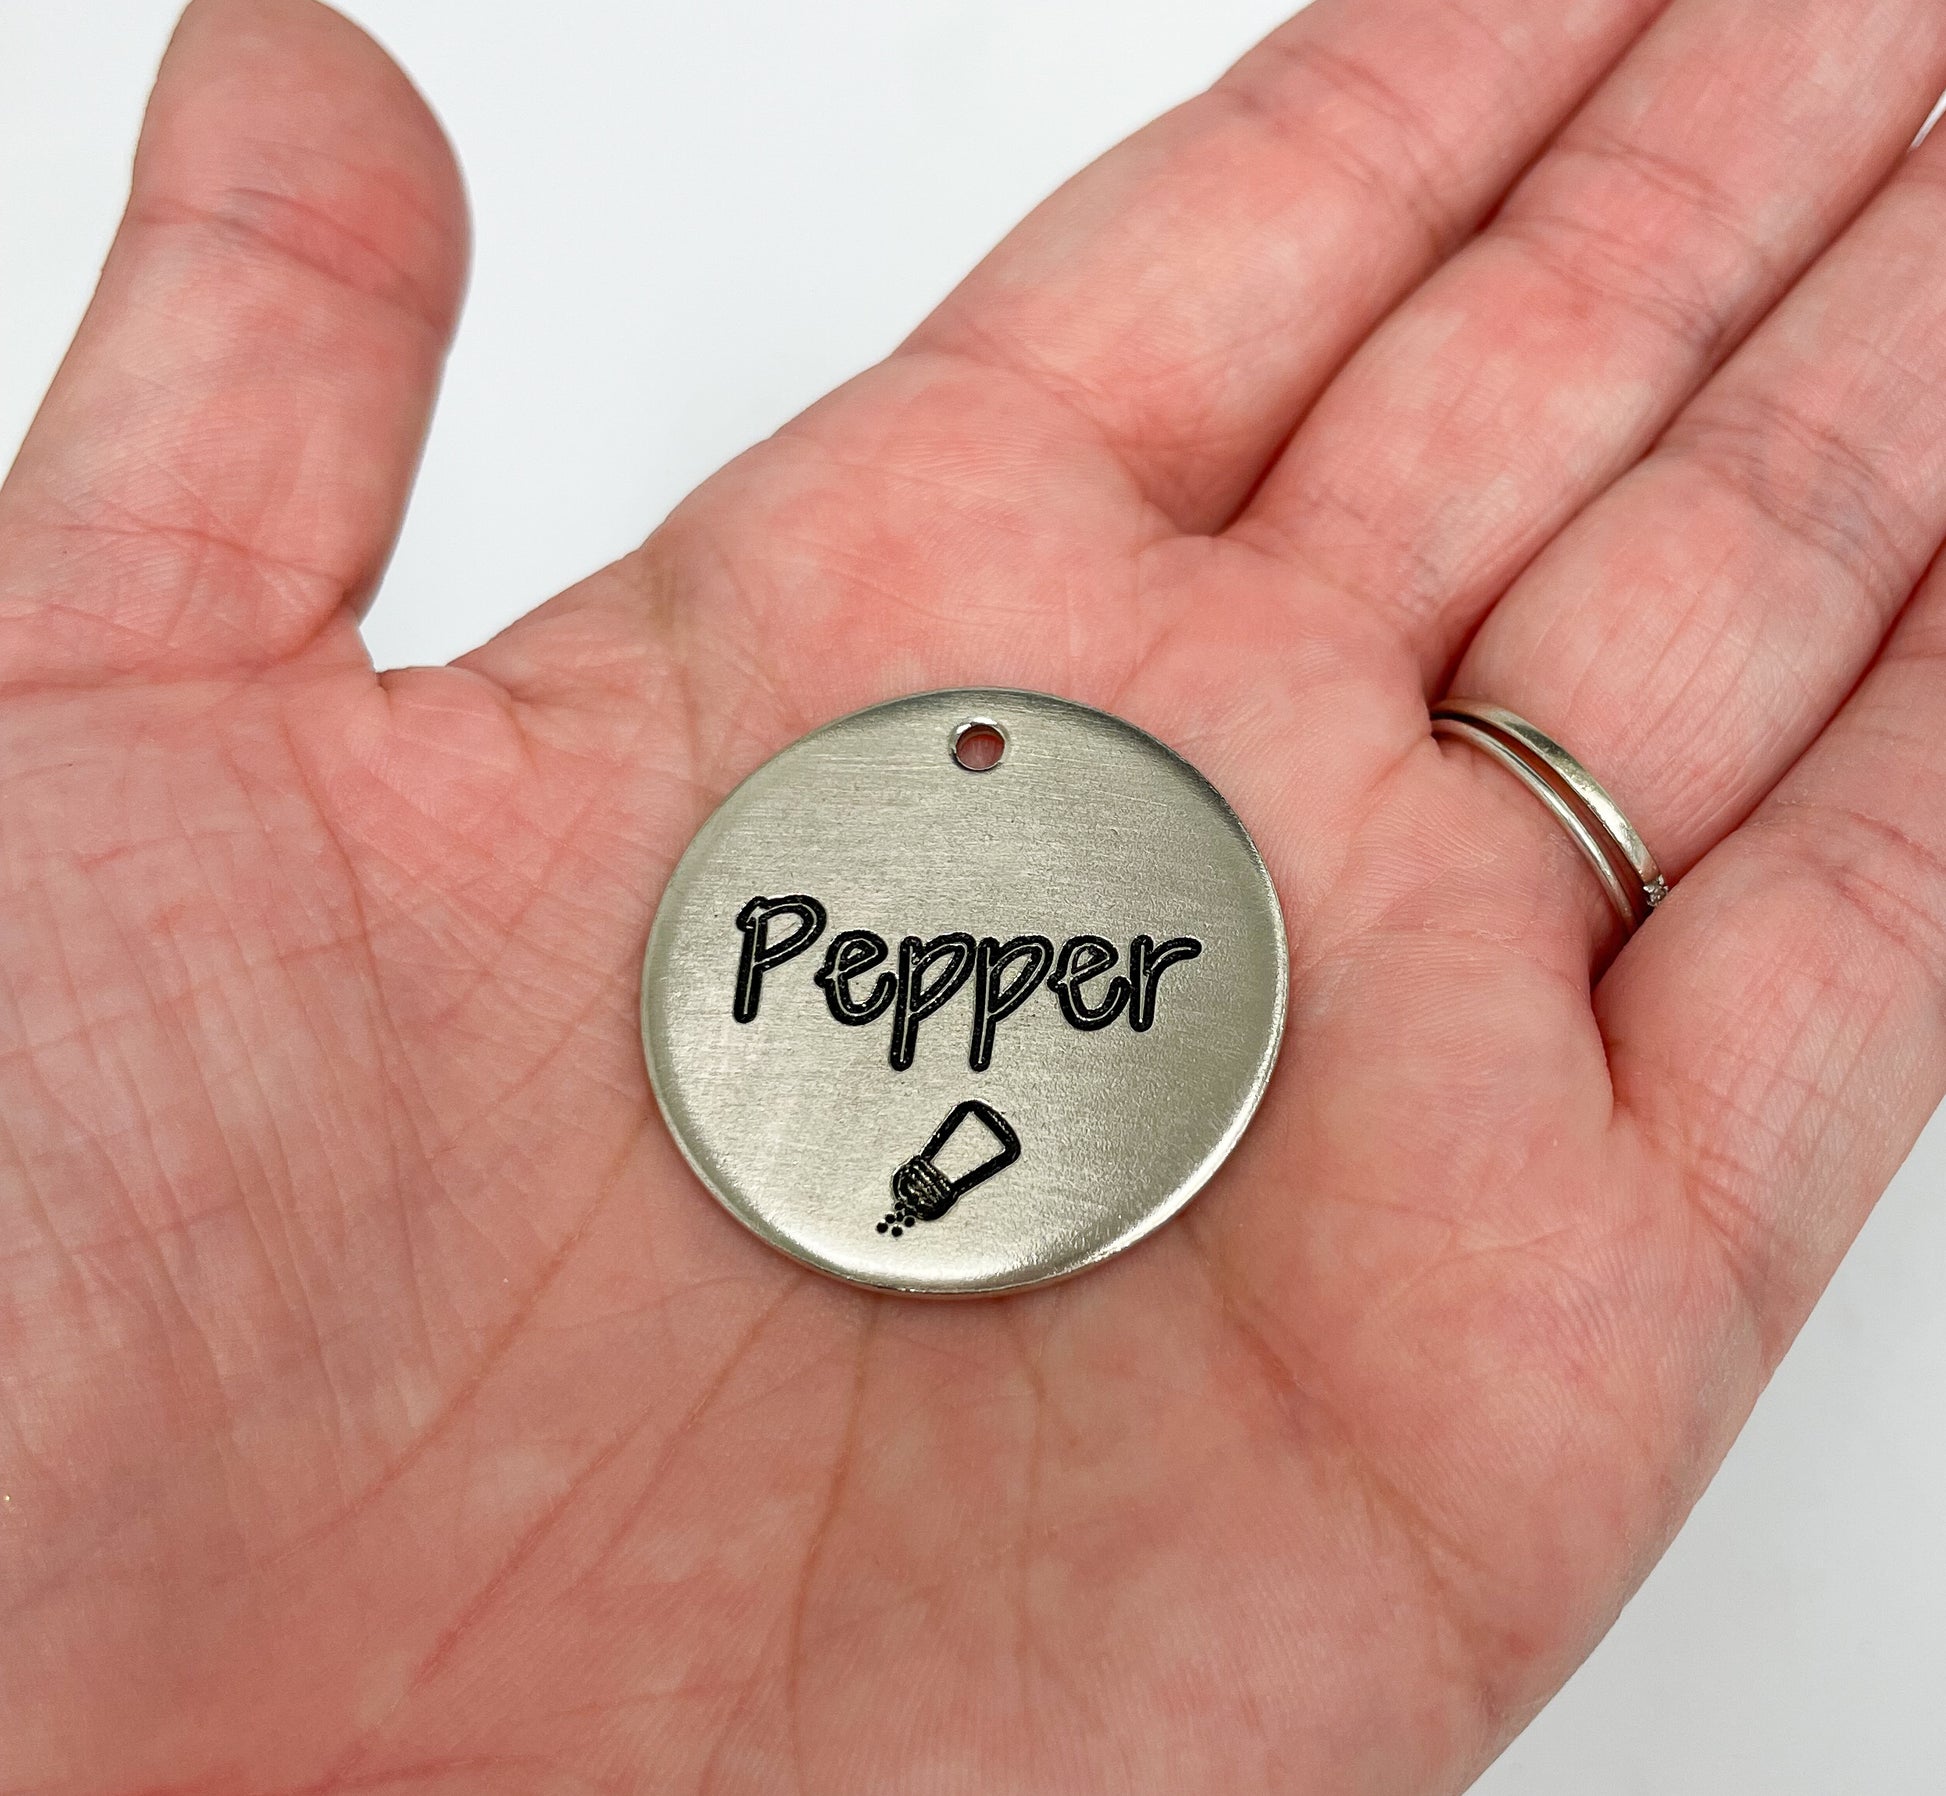 Personalized Dog Tag - Pepper Shaker Design Engraved Dog Tag - Cat ID Tag - Dog Collar Tag - Custom Dog Tag - Pet ID Tag - Pet Name Tag - Emoji Dog Tag - Dog Tag - Dog Gear - Dog Accessories - Pet Accessories